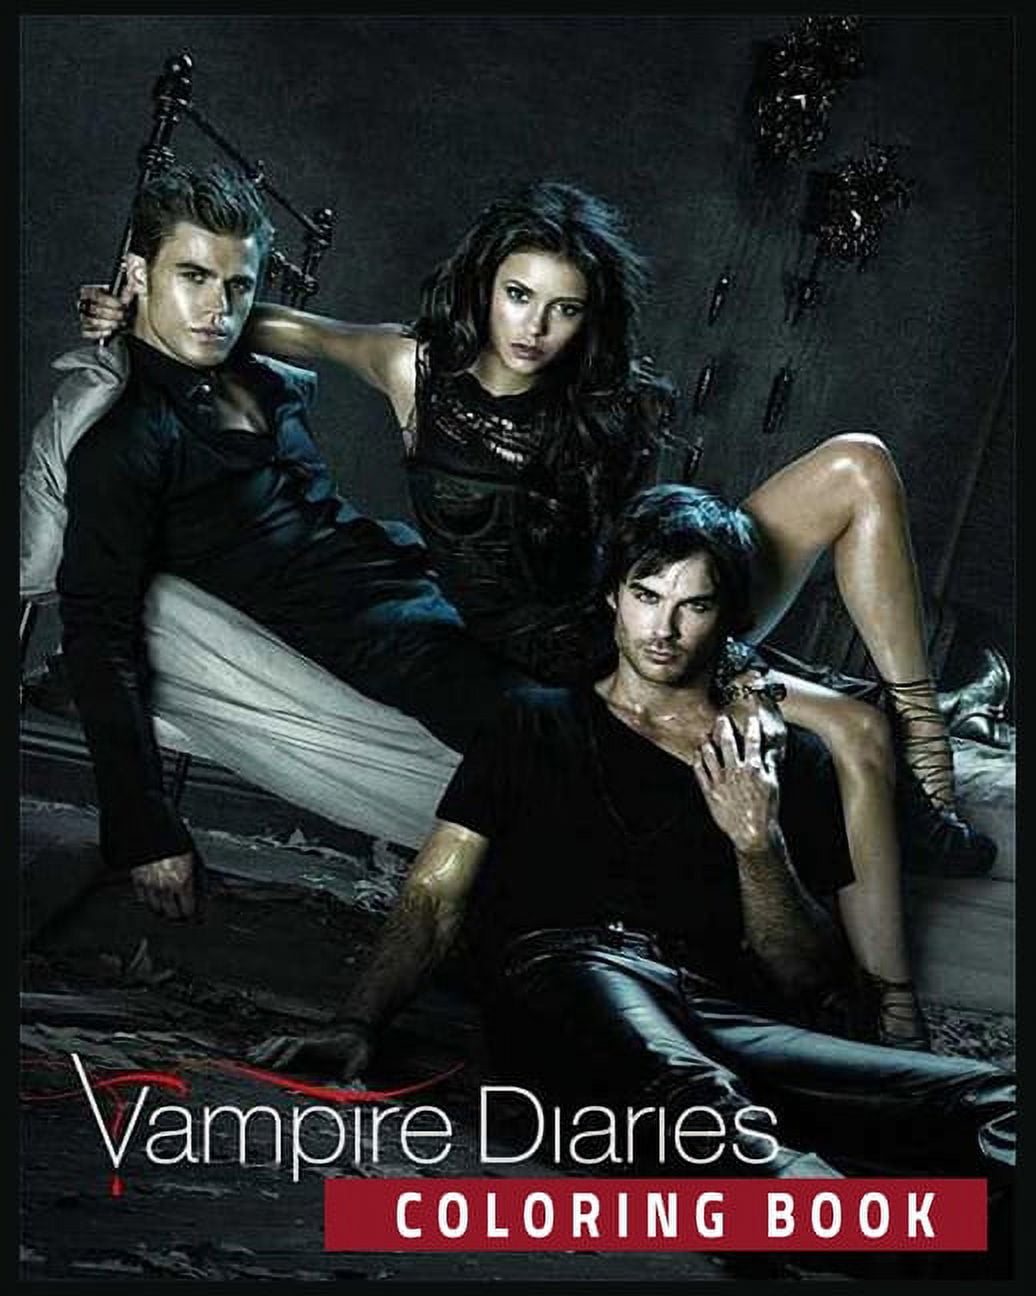 vampire diaries coloring book: Coloring Books For Teens And Adults